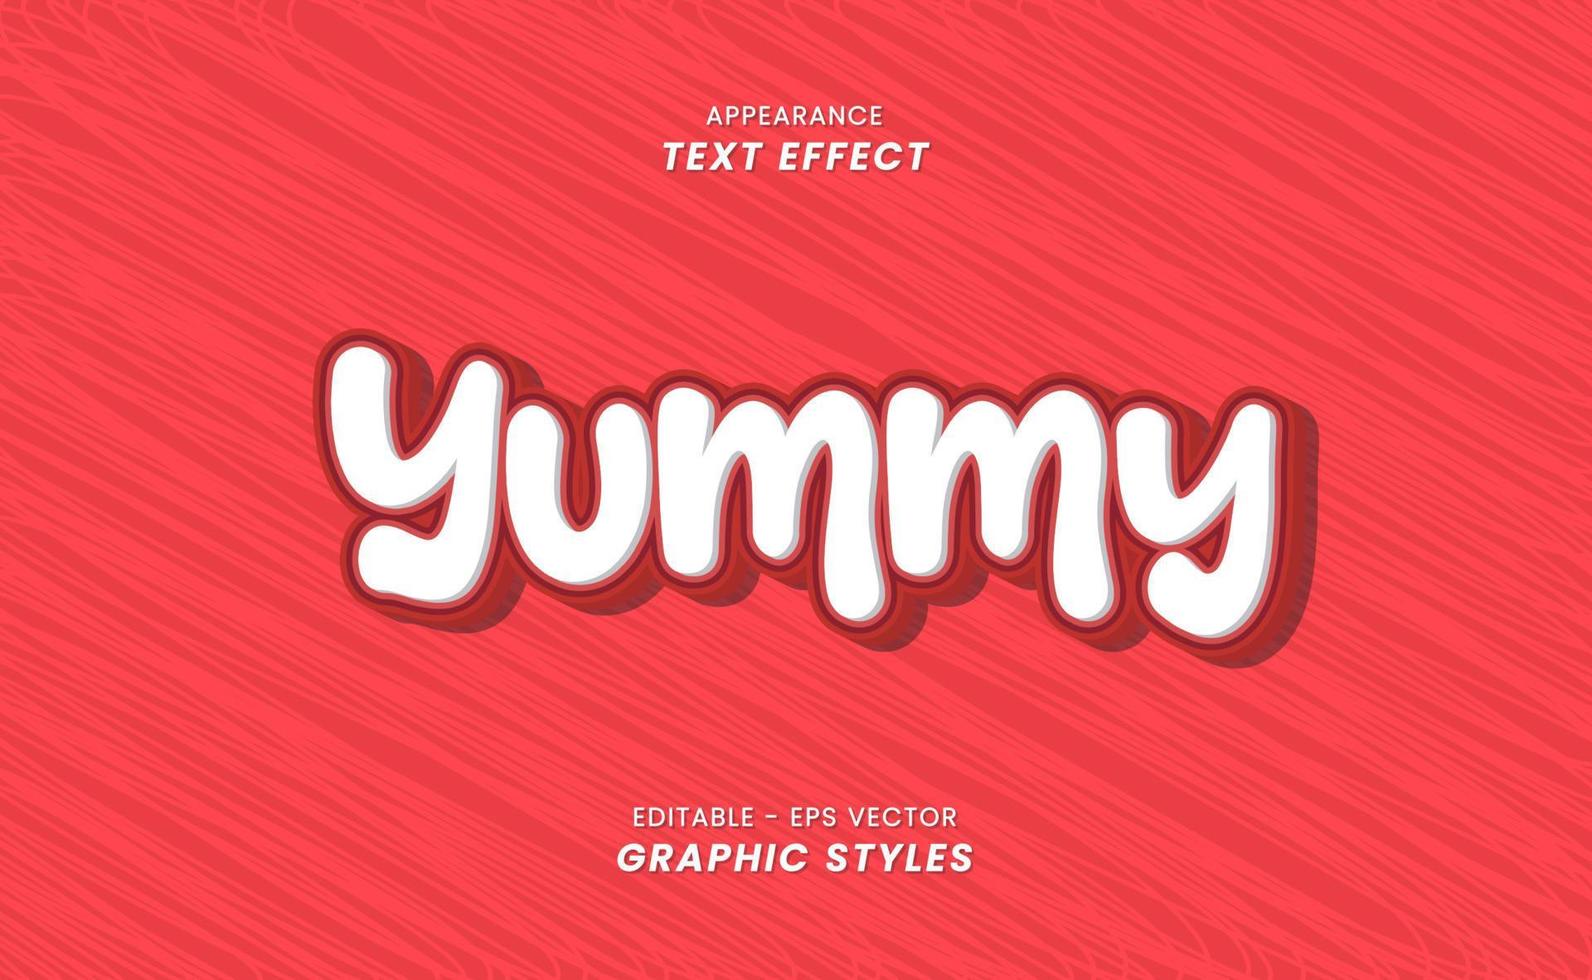 Appearance Text Effects - With Yummy Words vector